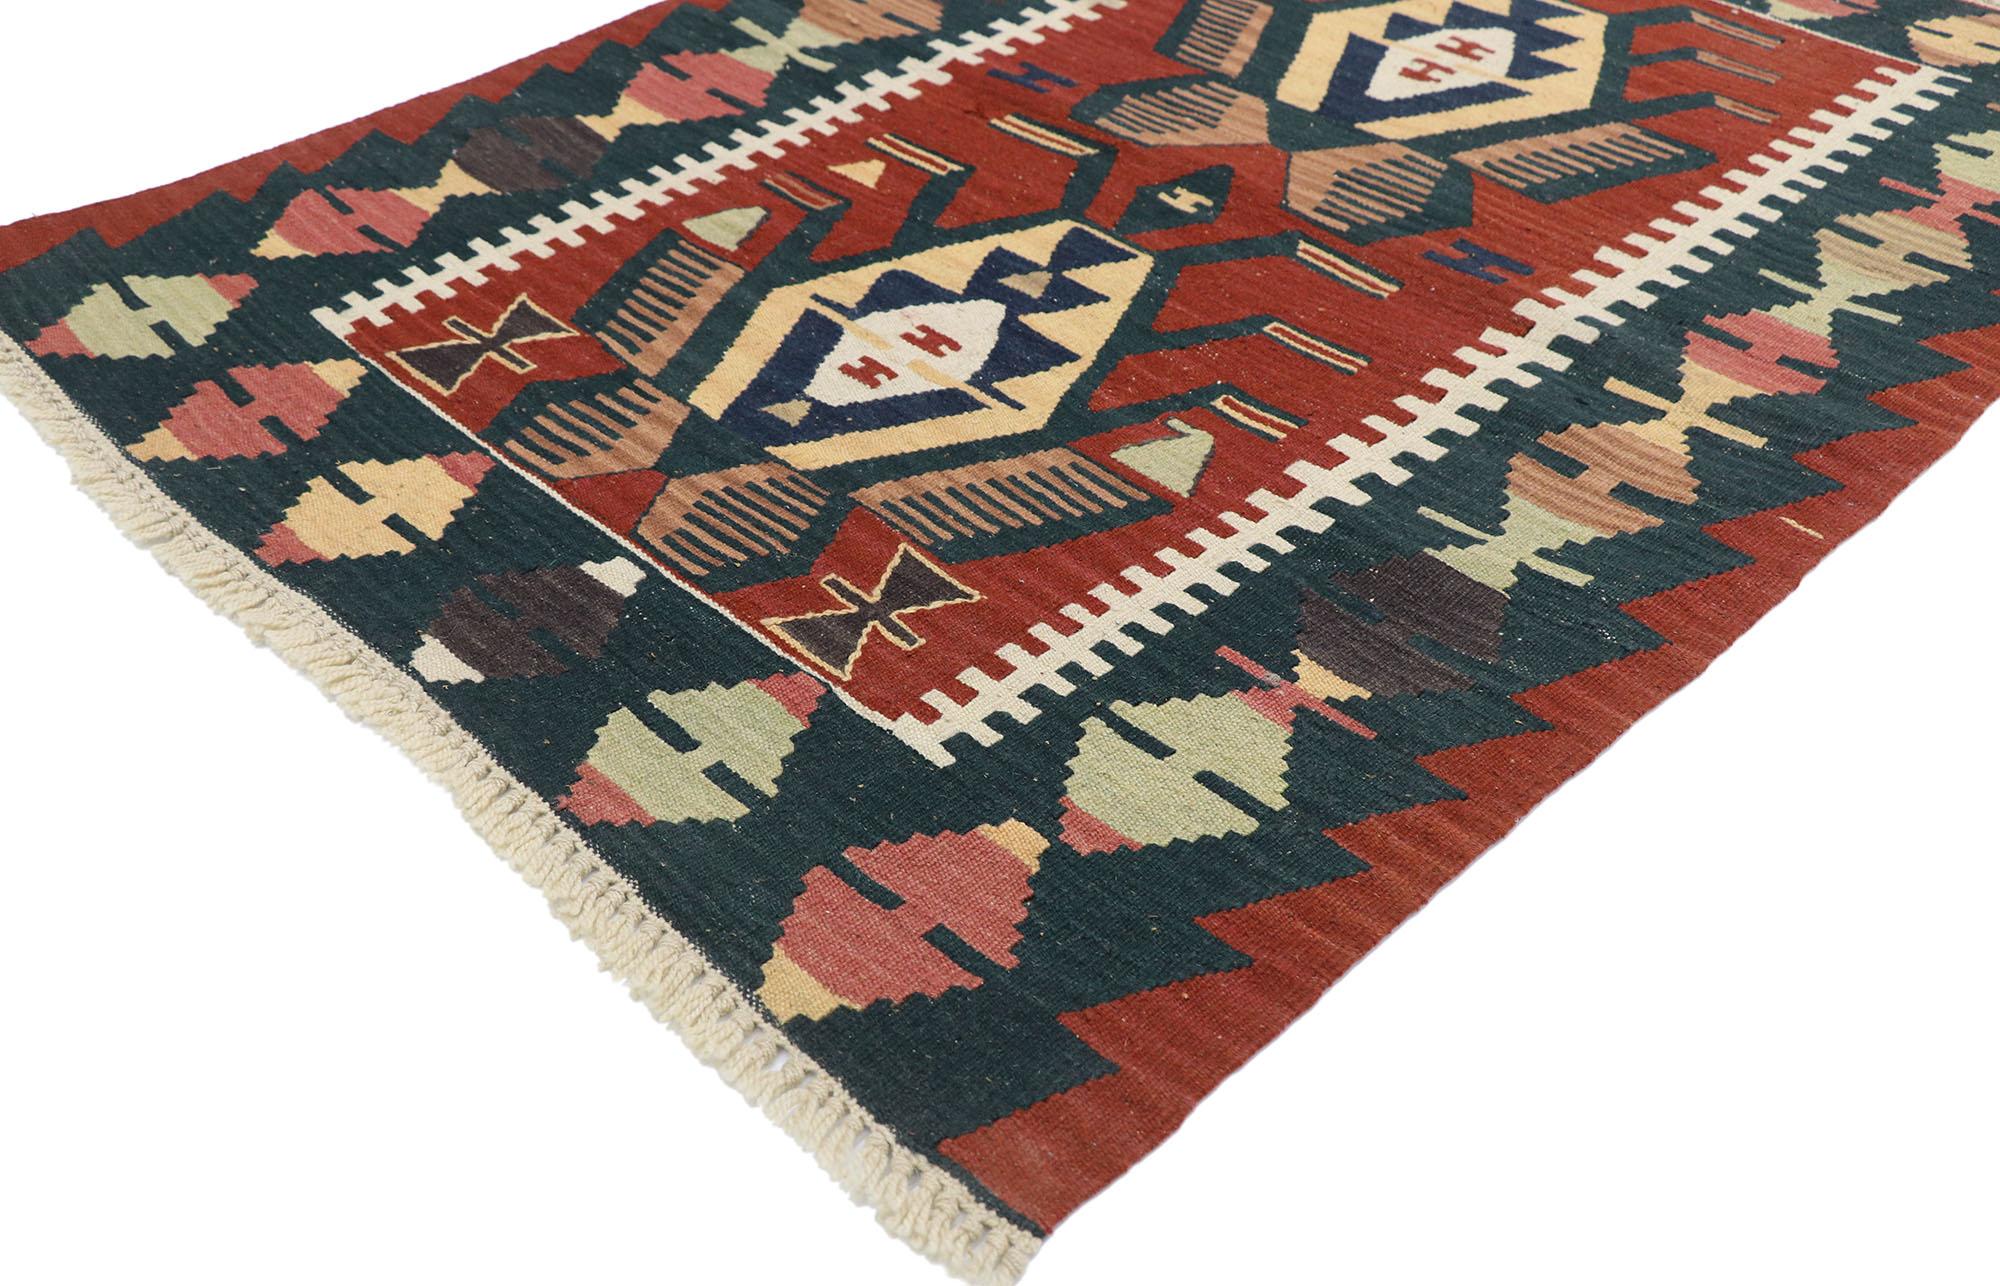 77843 Vintage Persian Shiraz Kilim rug with Tribal style 03'00 x 04'01. Full of tiny details and a bold expressive design combined with vibrant colors and tribal style, this hand-woven wool vintage Persian Shiraz kilim rug is a captivating vision of